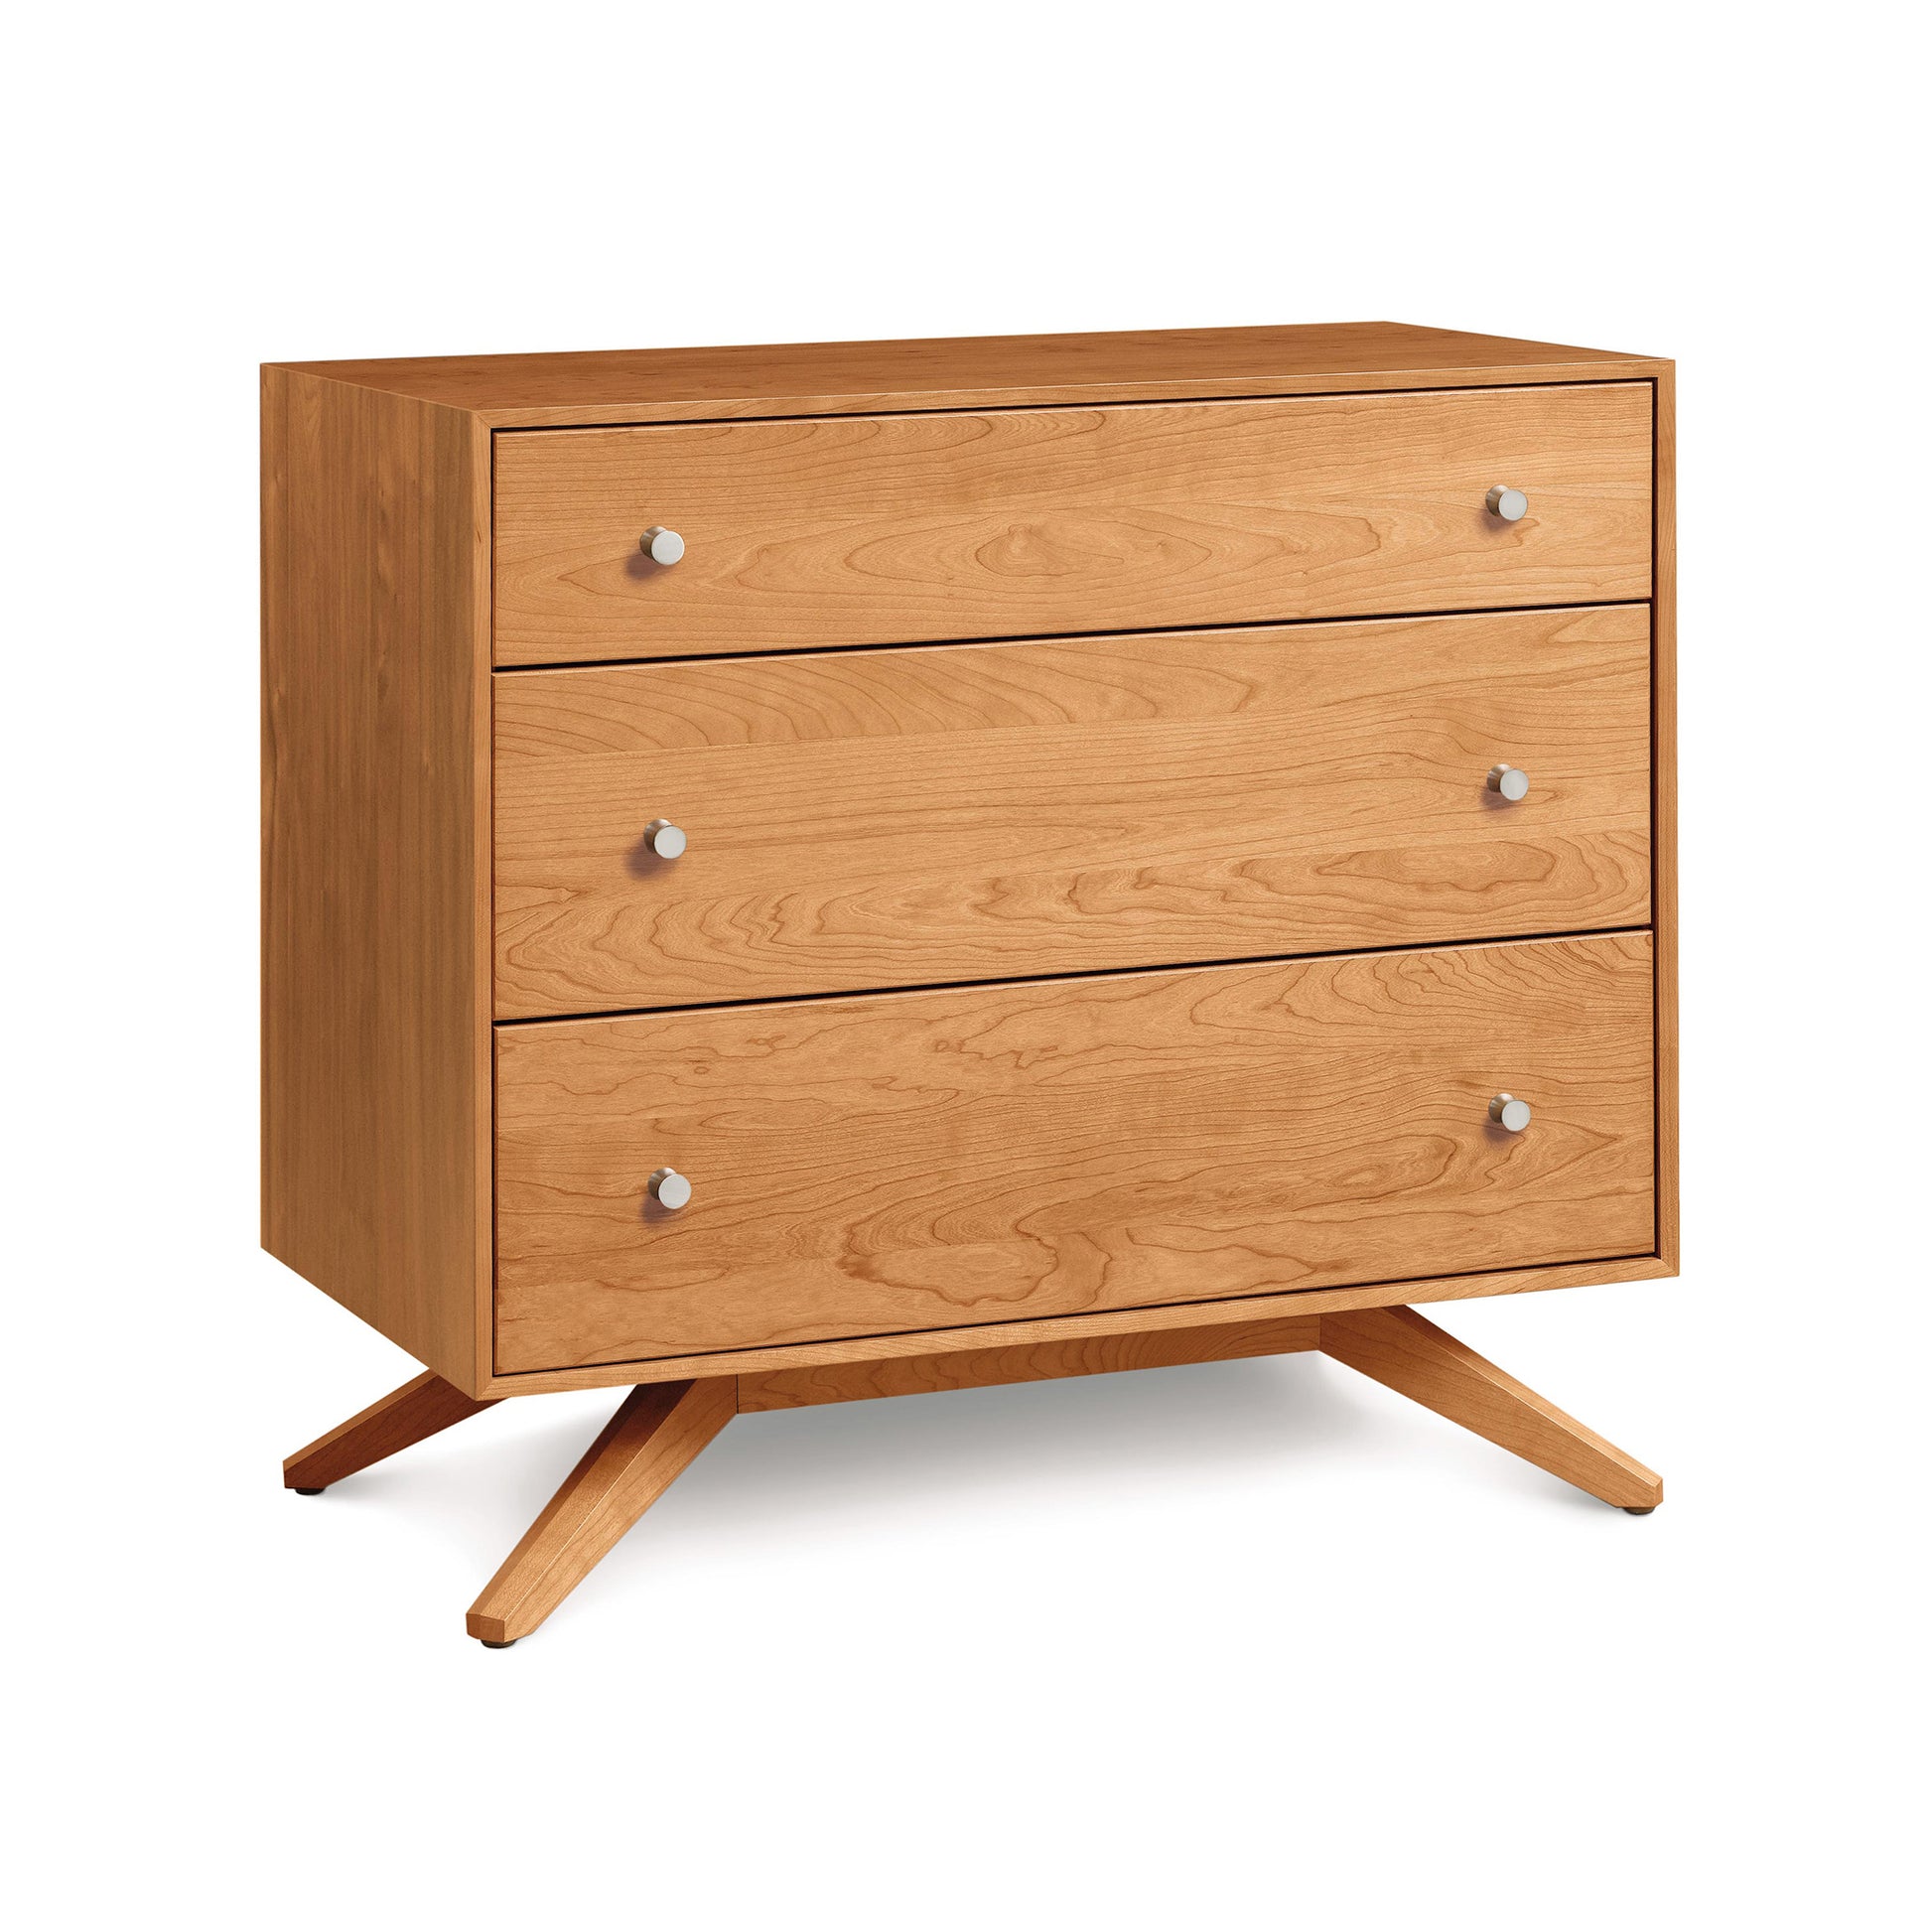 An Astrid 3-Drawer Chest made of sustainable hardwood by Copeland Furniture, placed on a white background.